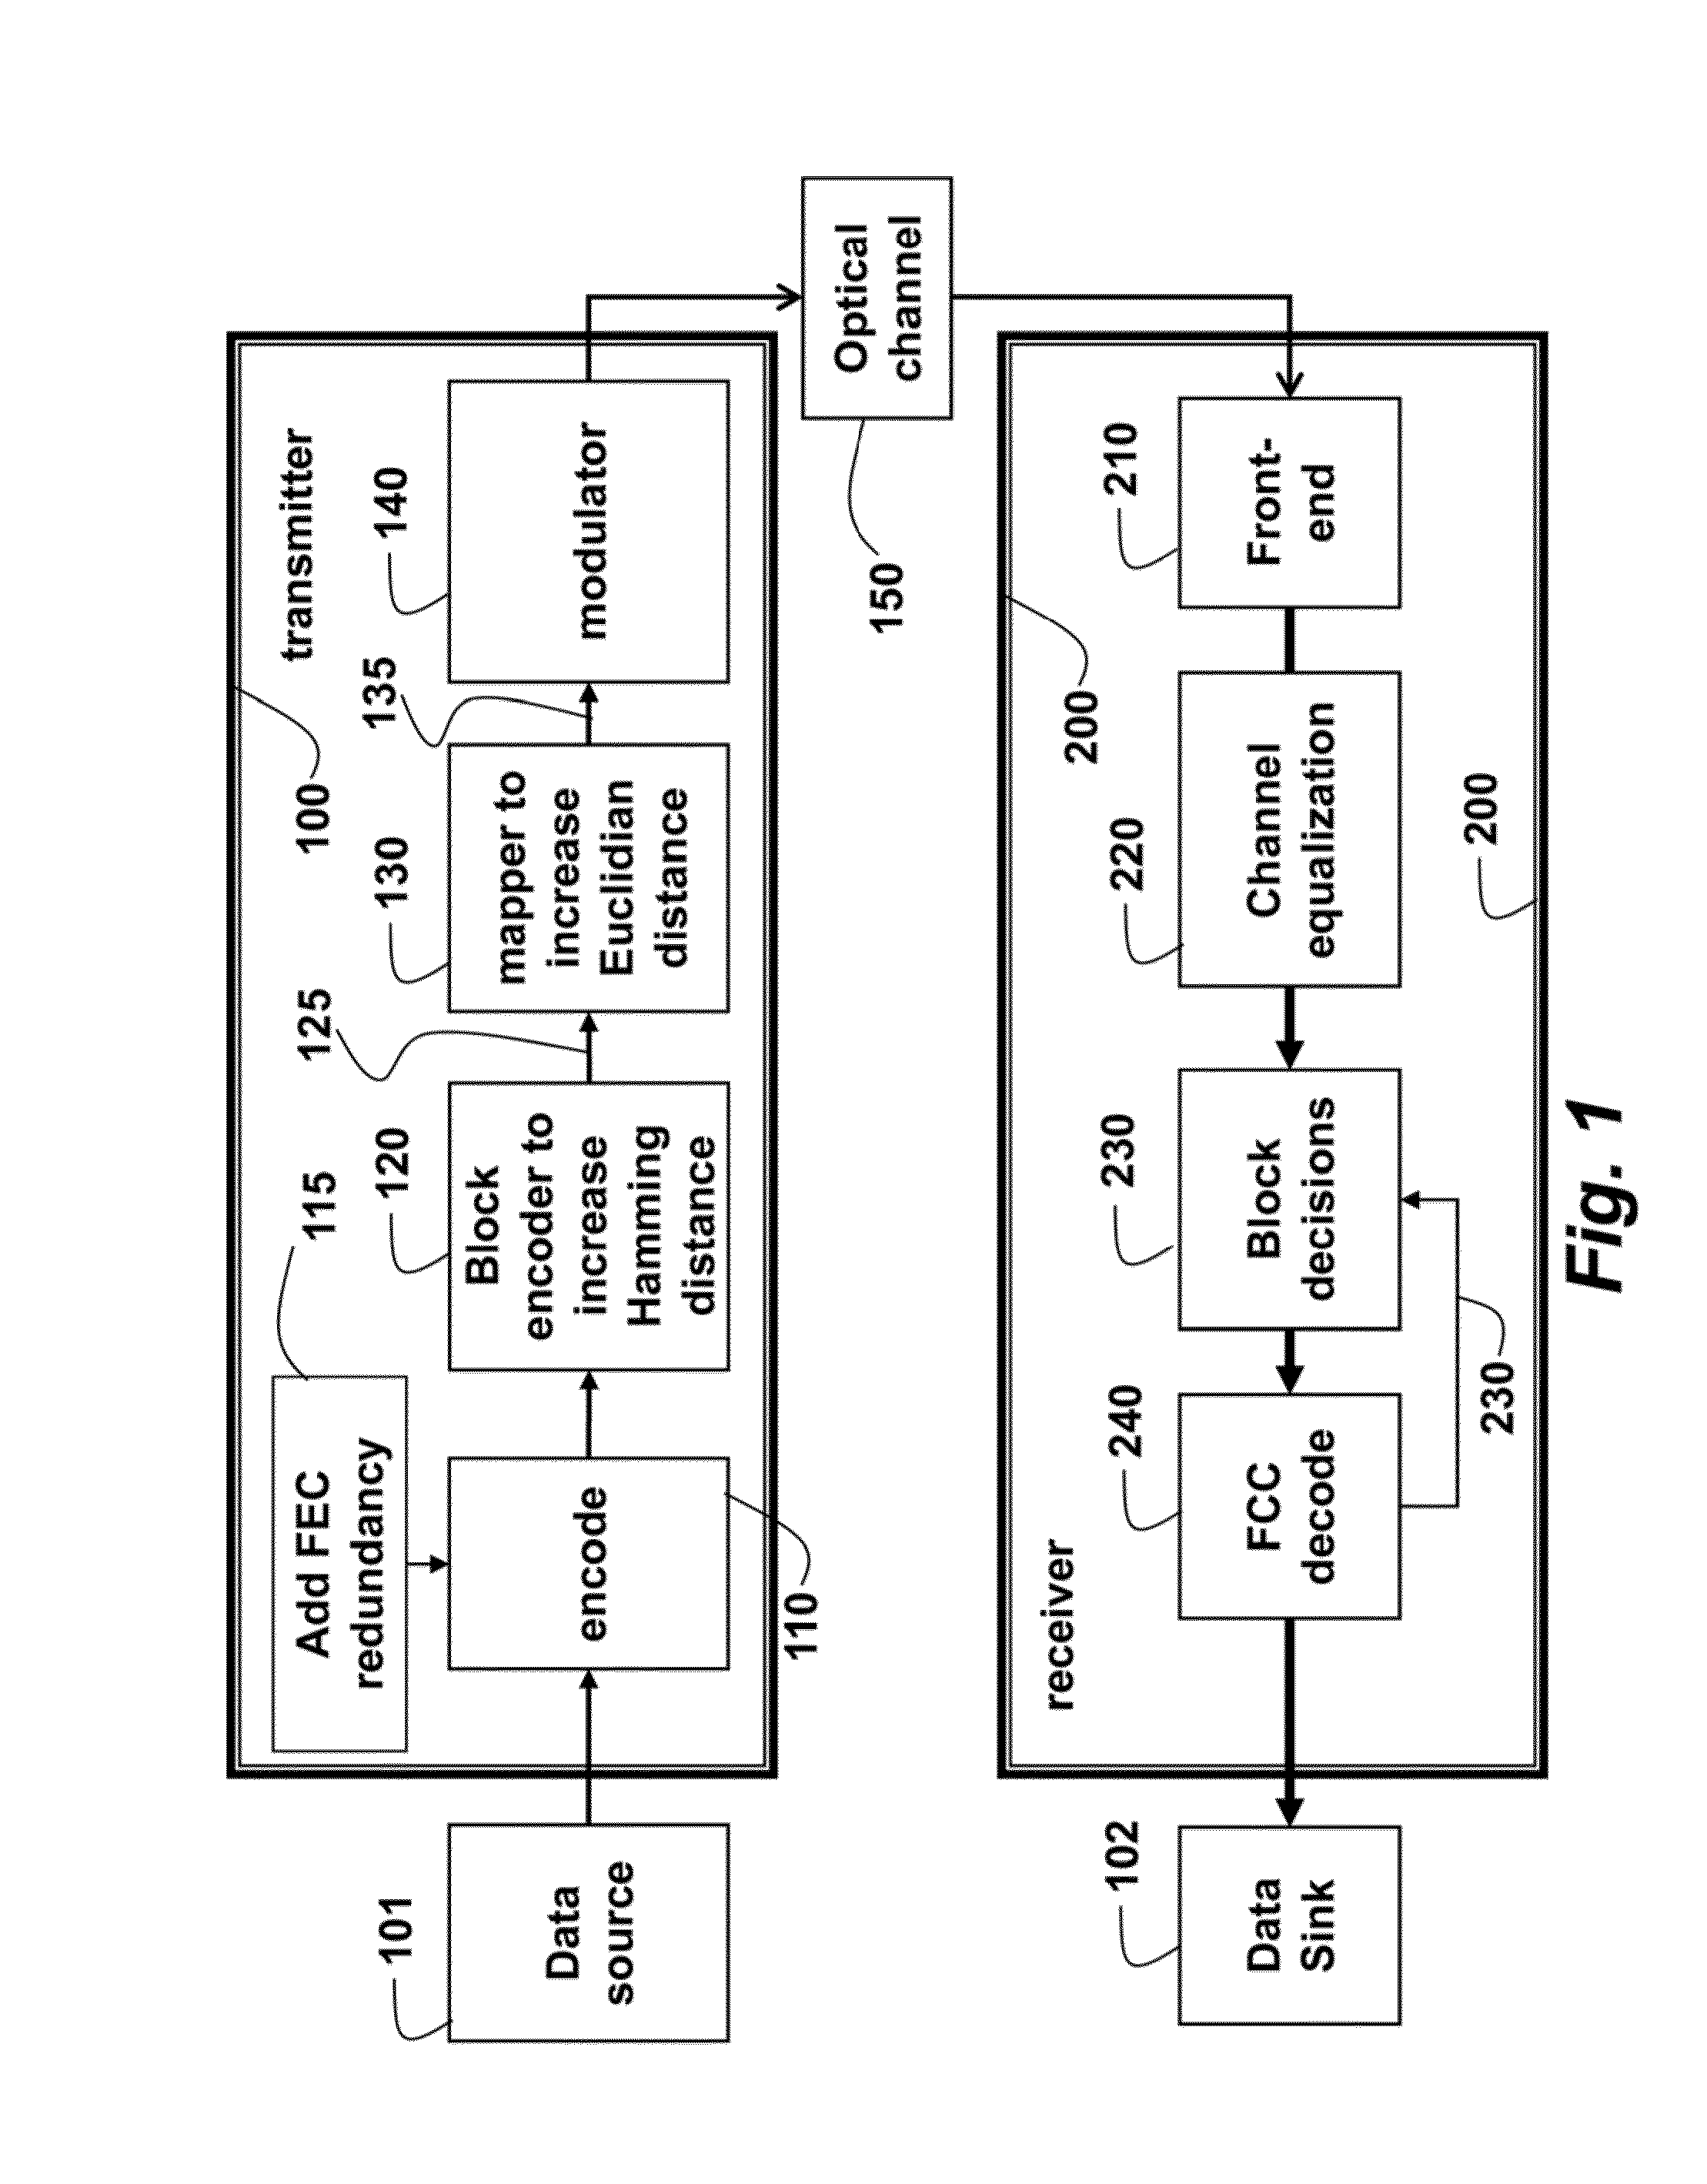 Method and System for Modulating Optical Signals as High-Dimensional Lattice Constellation Points to Increase Tolerance to Noise